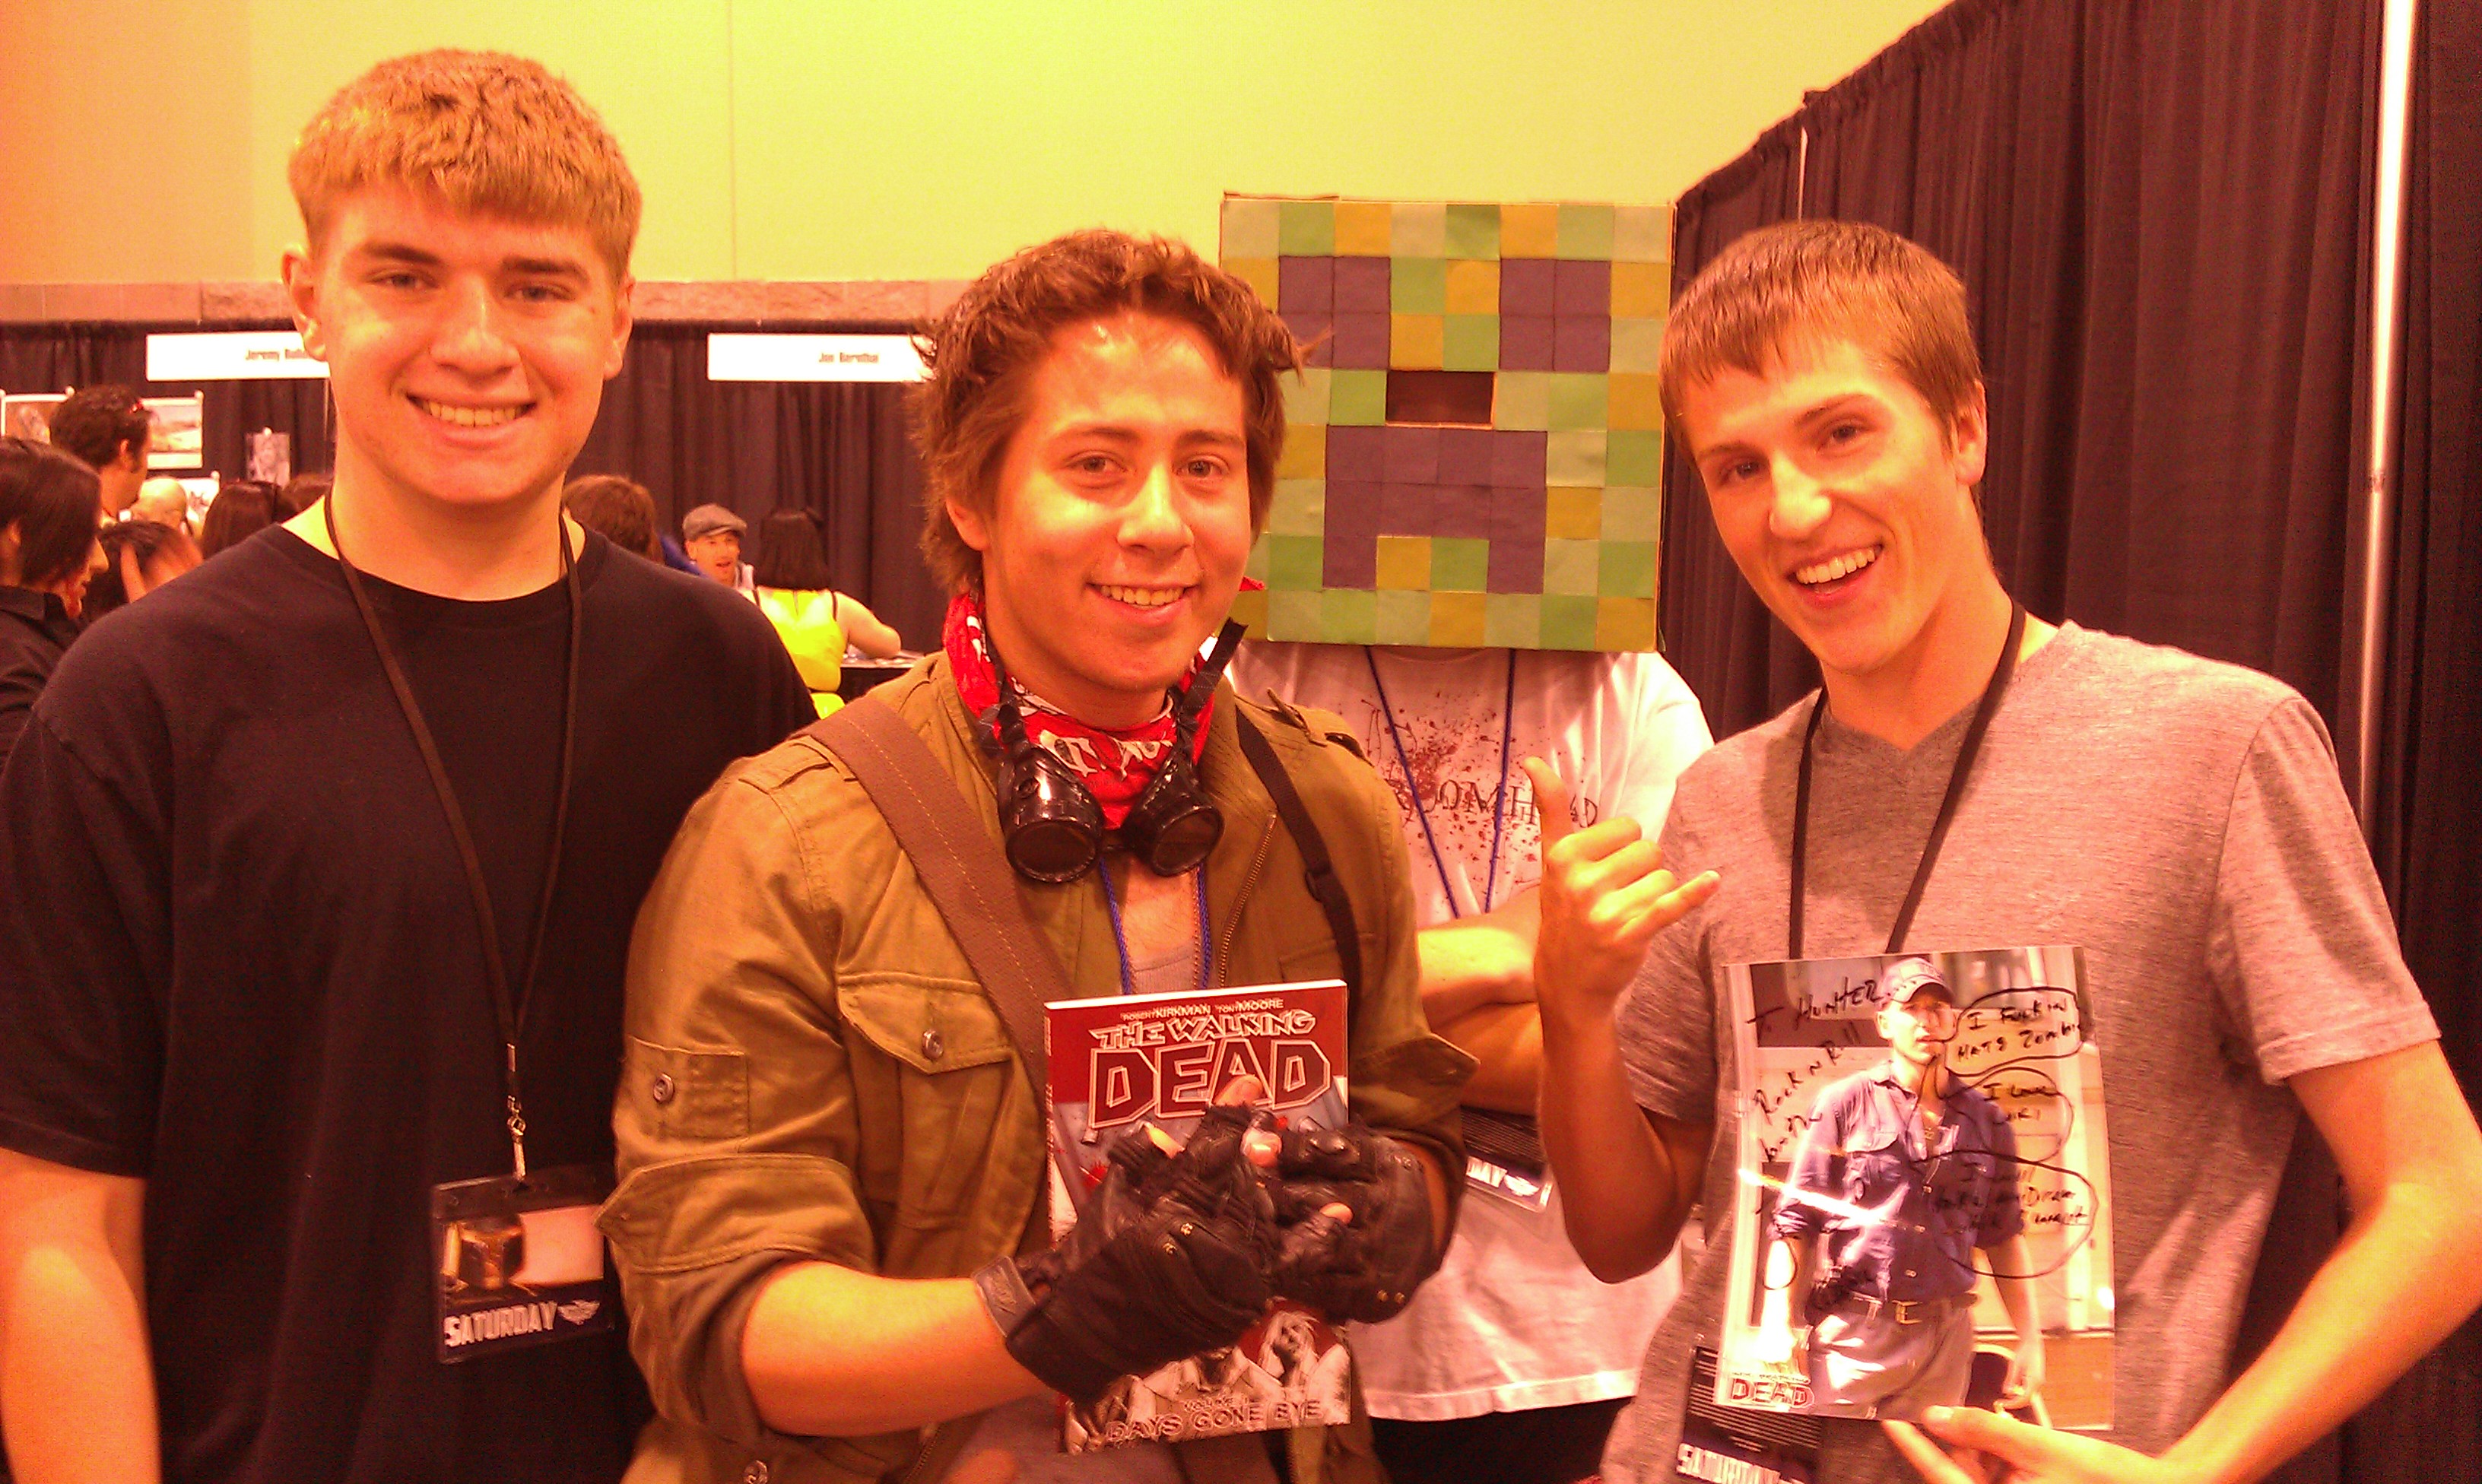 File:Friends after autograph session with Jon Bernthal at 2012 Phoenix Comicon.jpg ...3264 x 1952